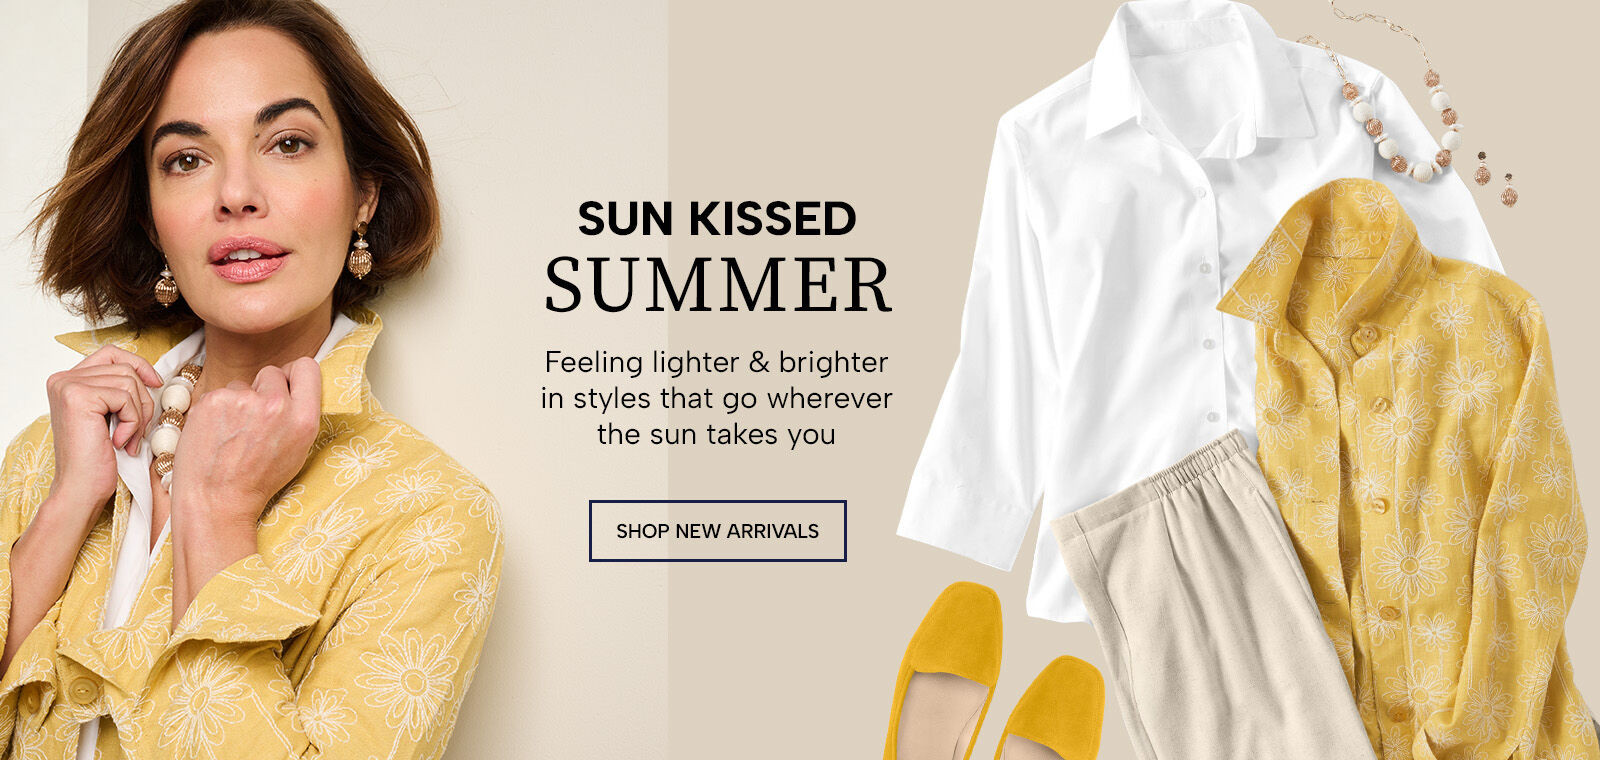 sun kissed summer feeling lighter & brighter in styles that go wherever the sun takes you shop new arrivals